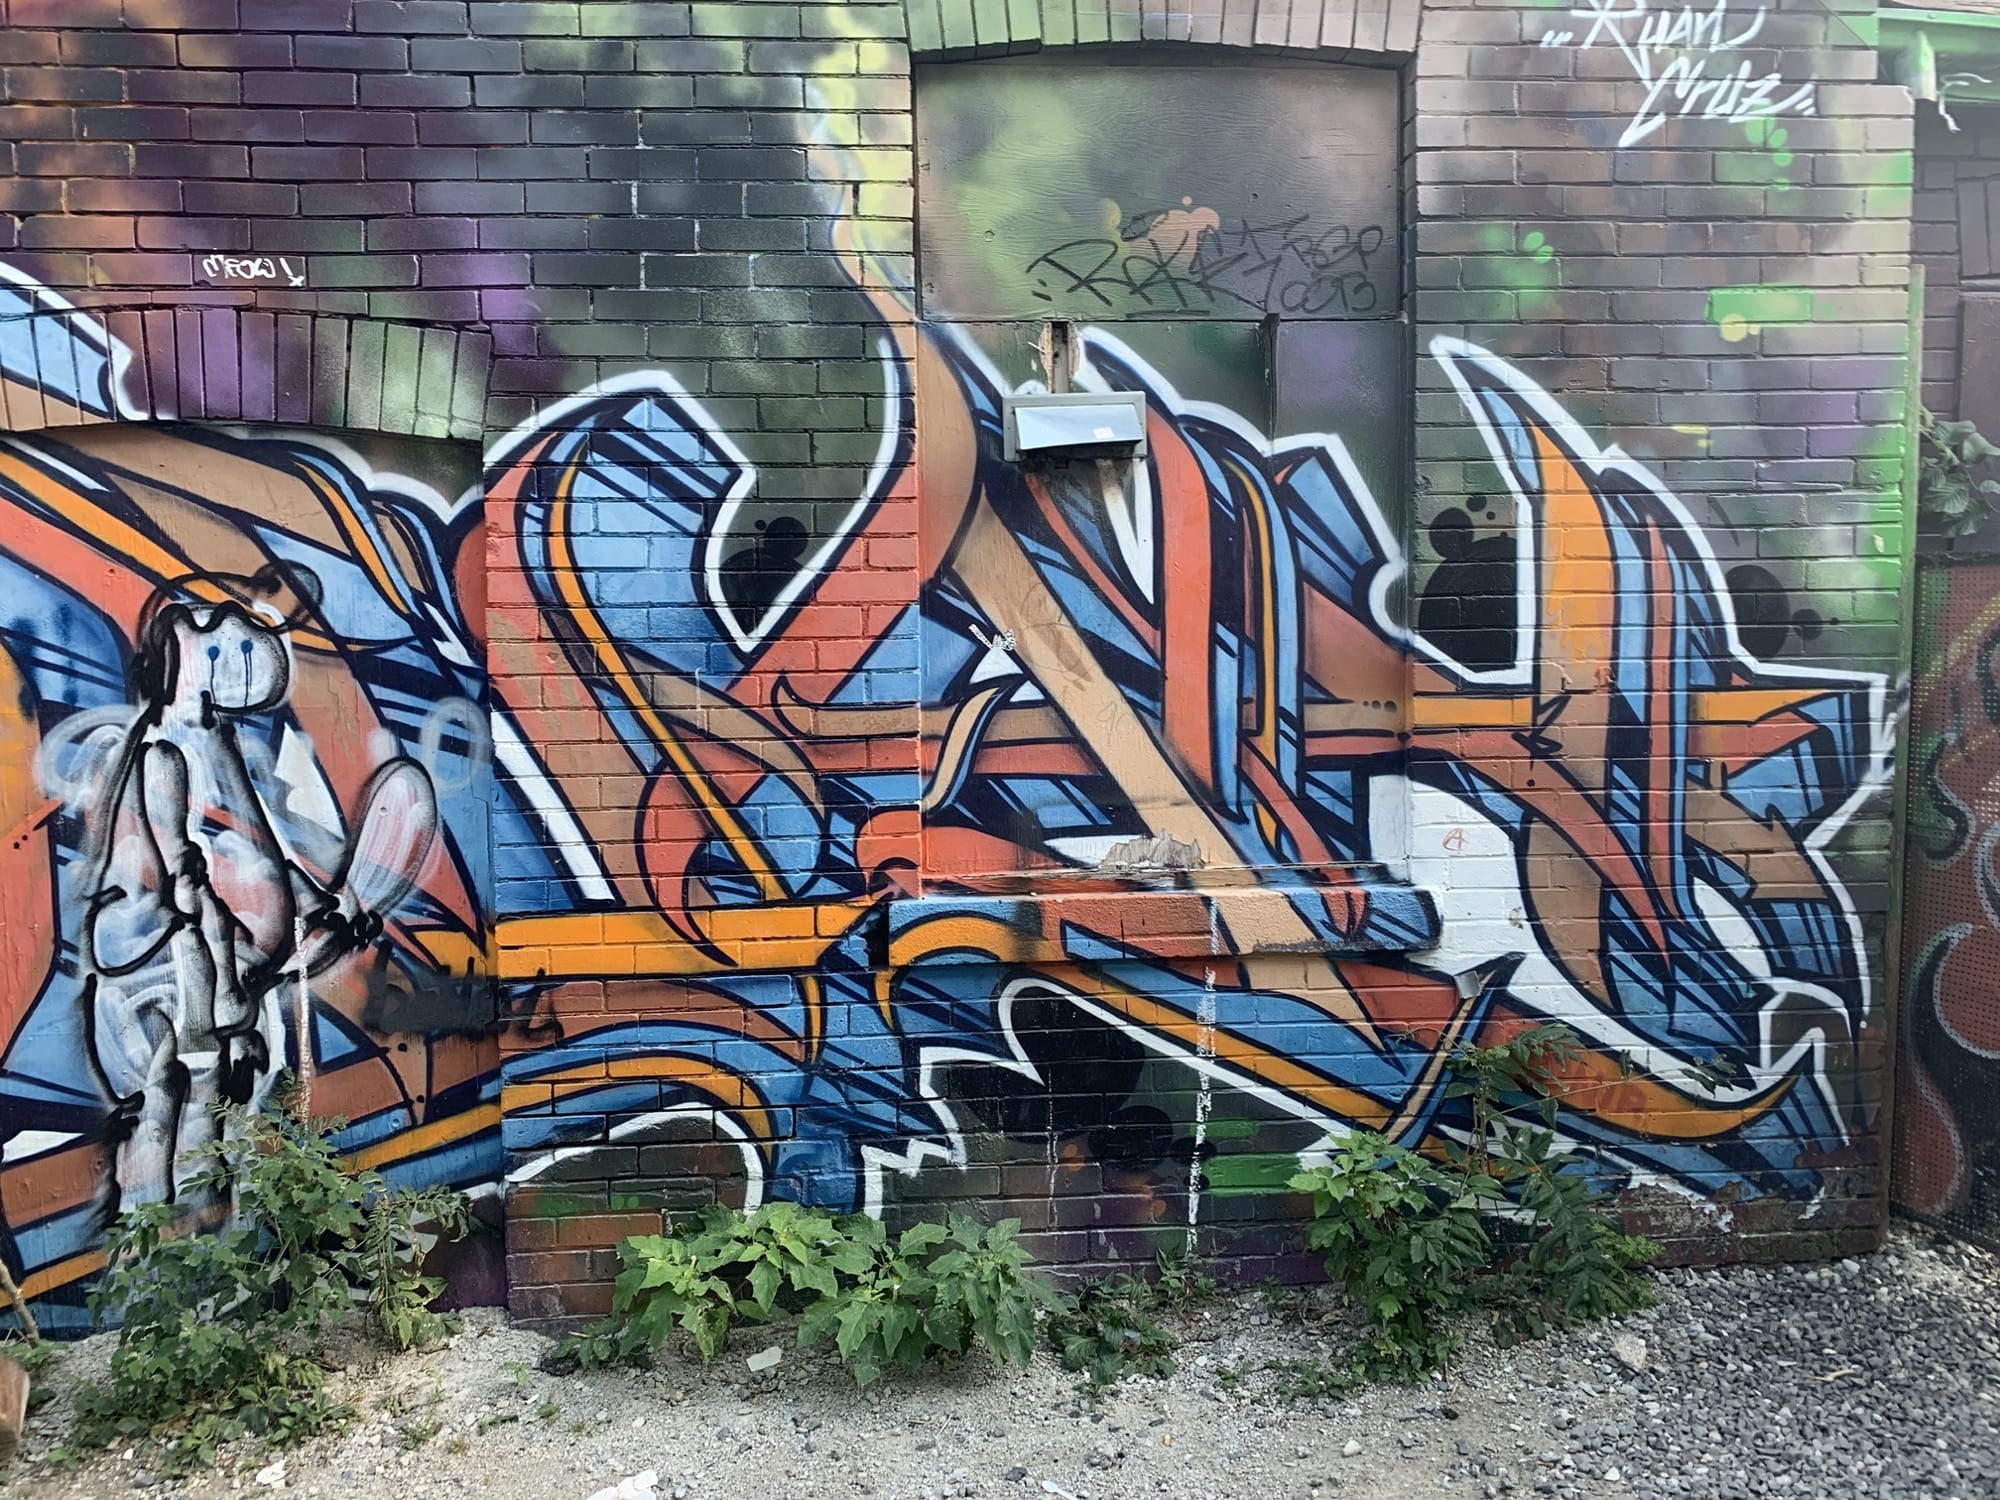 Graffiti 2429  captured by Rabot in Toronto Canada